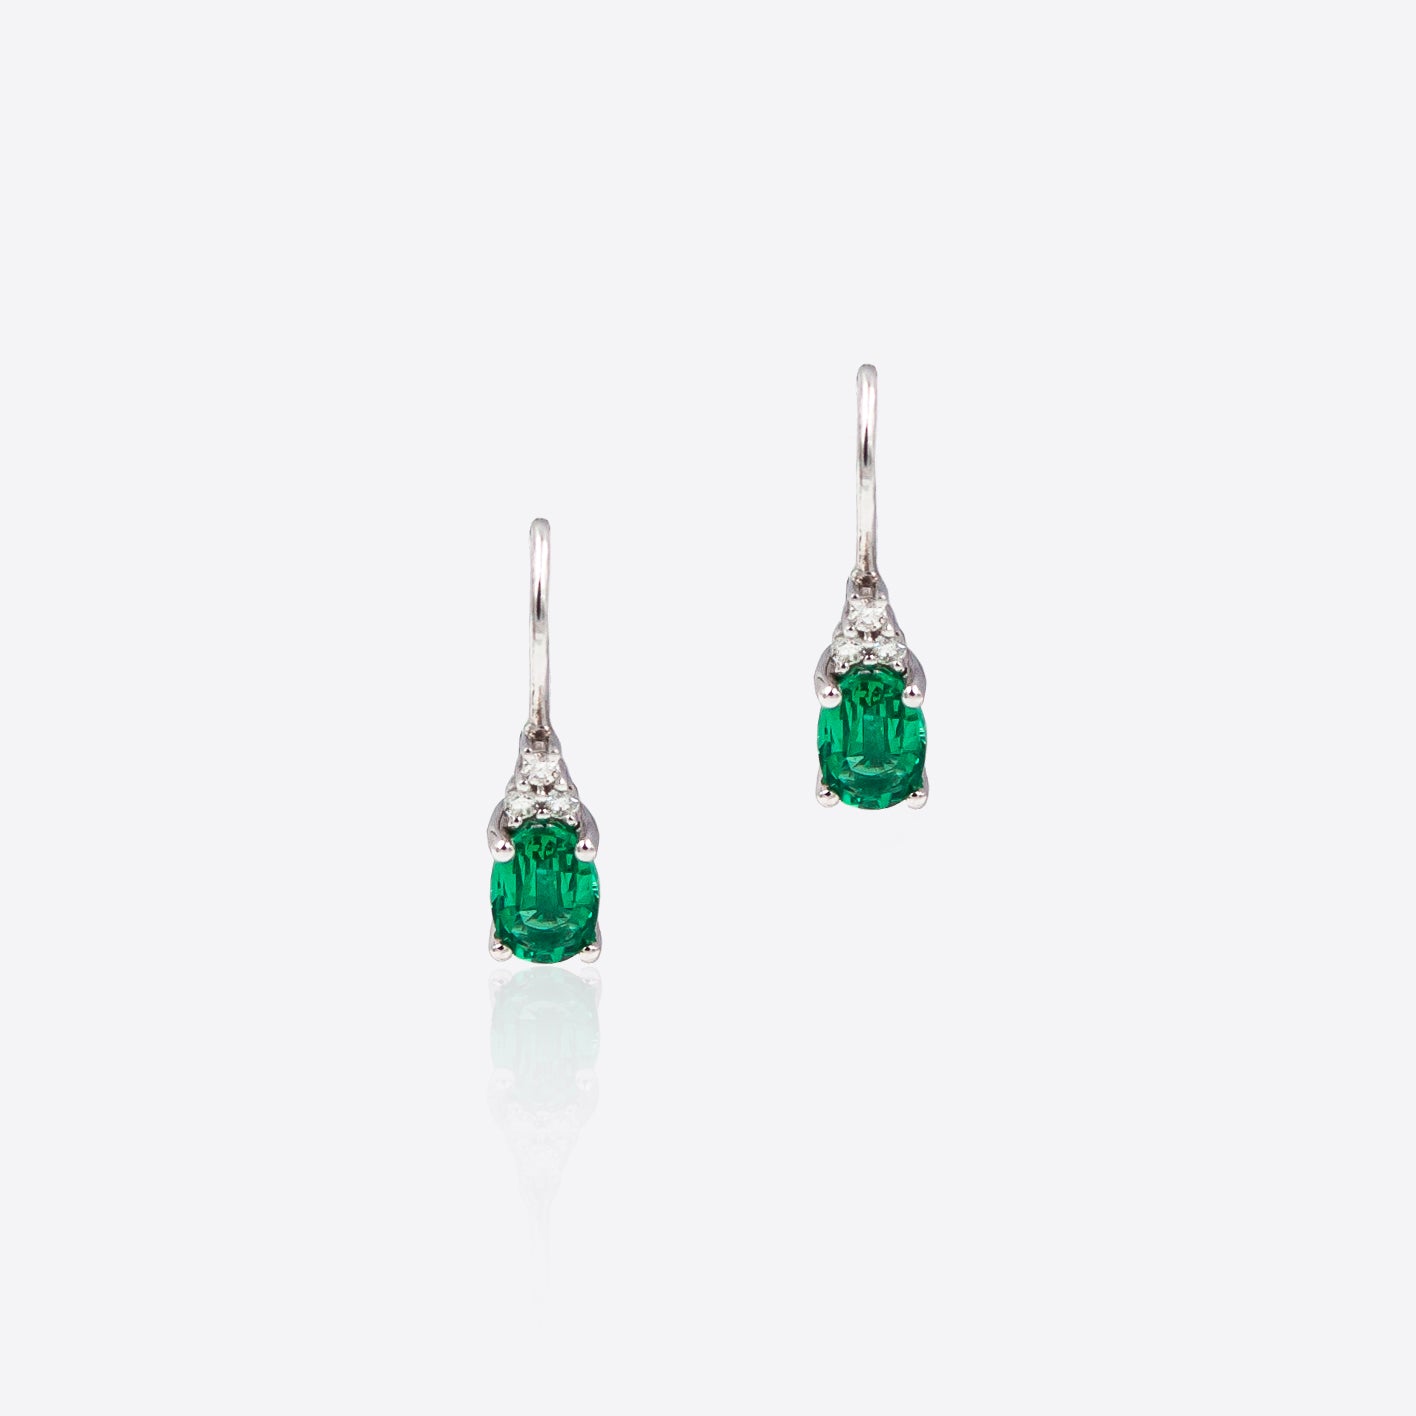 Droplets earrings with Diamonds and Emeralds